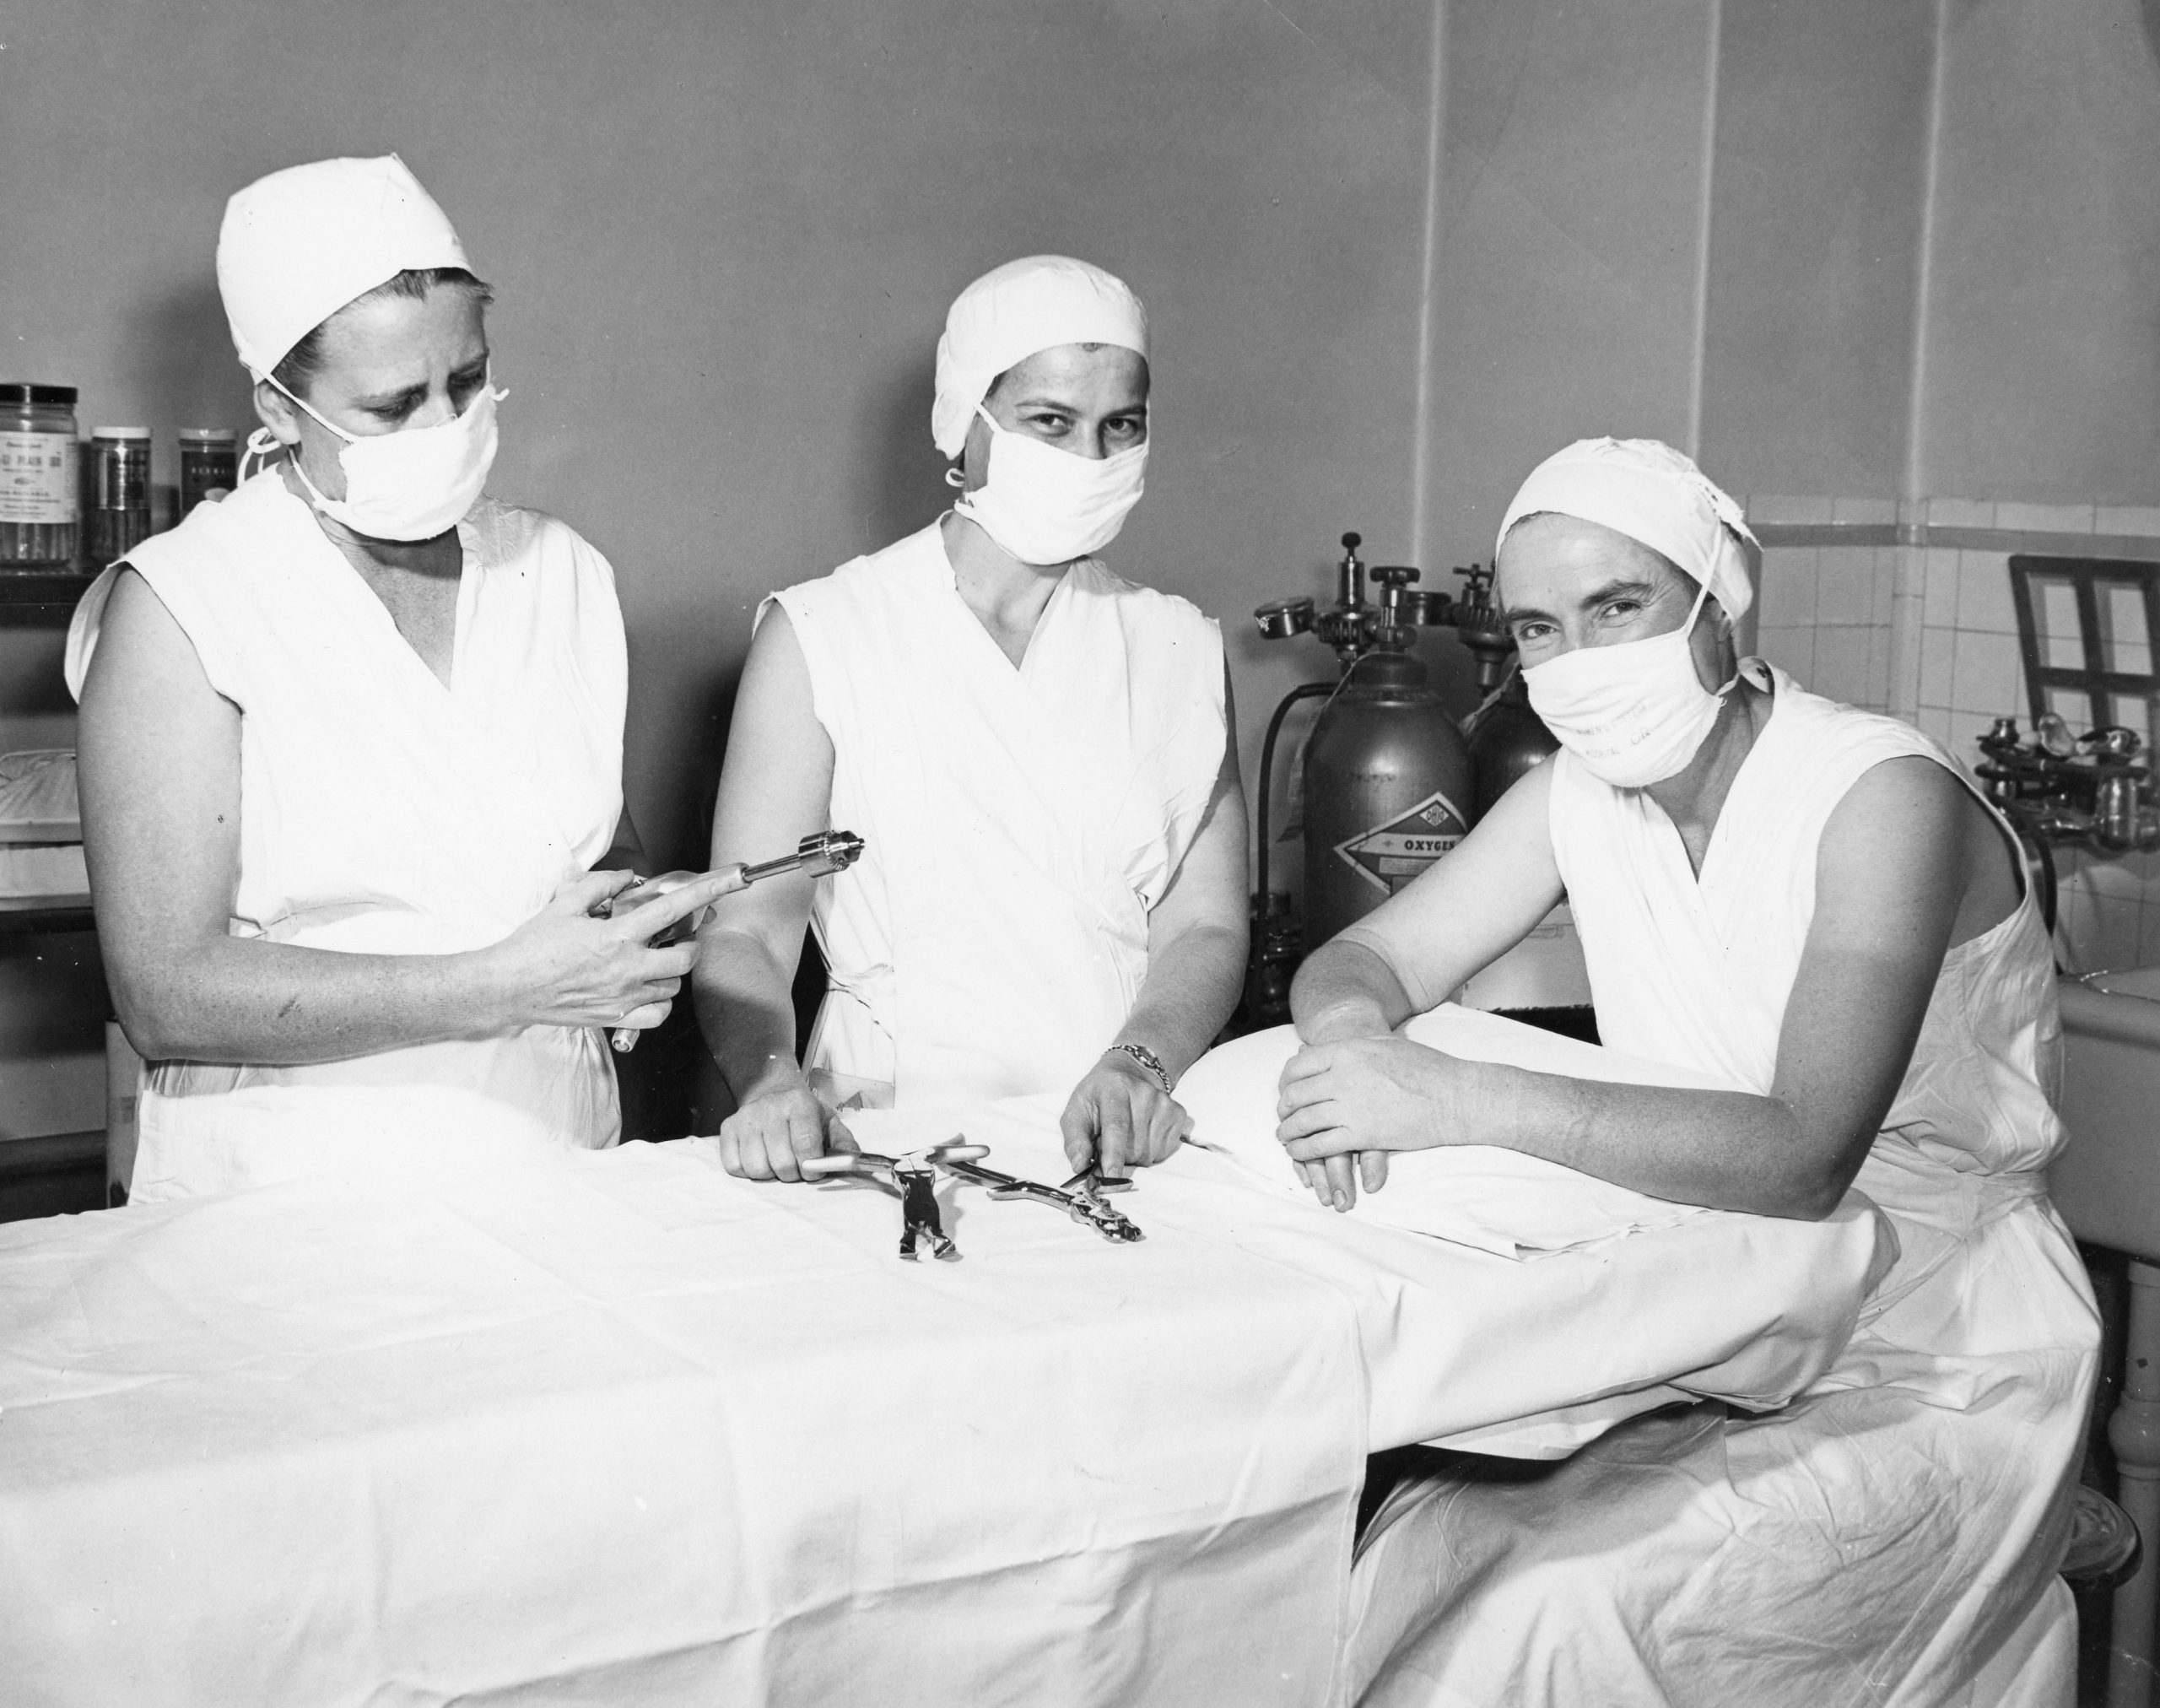 A black and white photo of three people in scrubs, posing by an operating table. Their eyes are smiling.